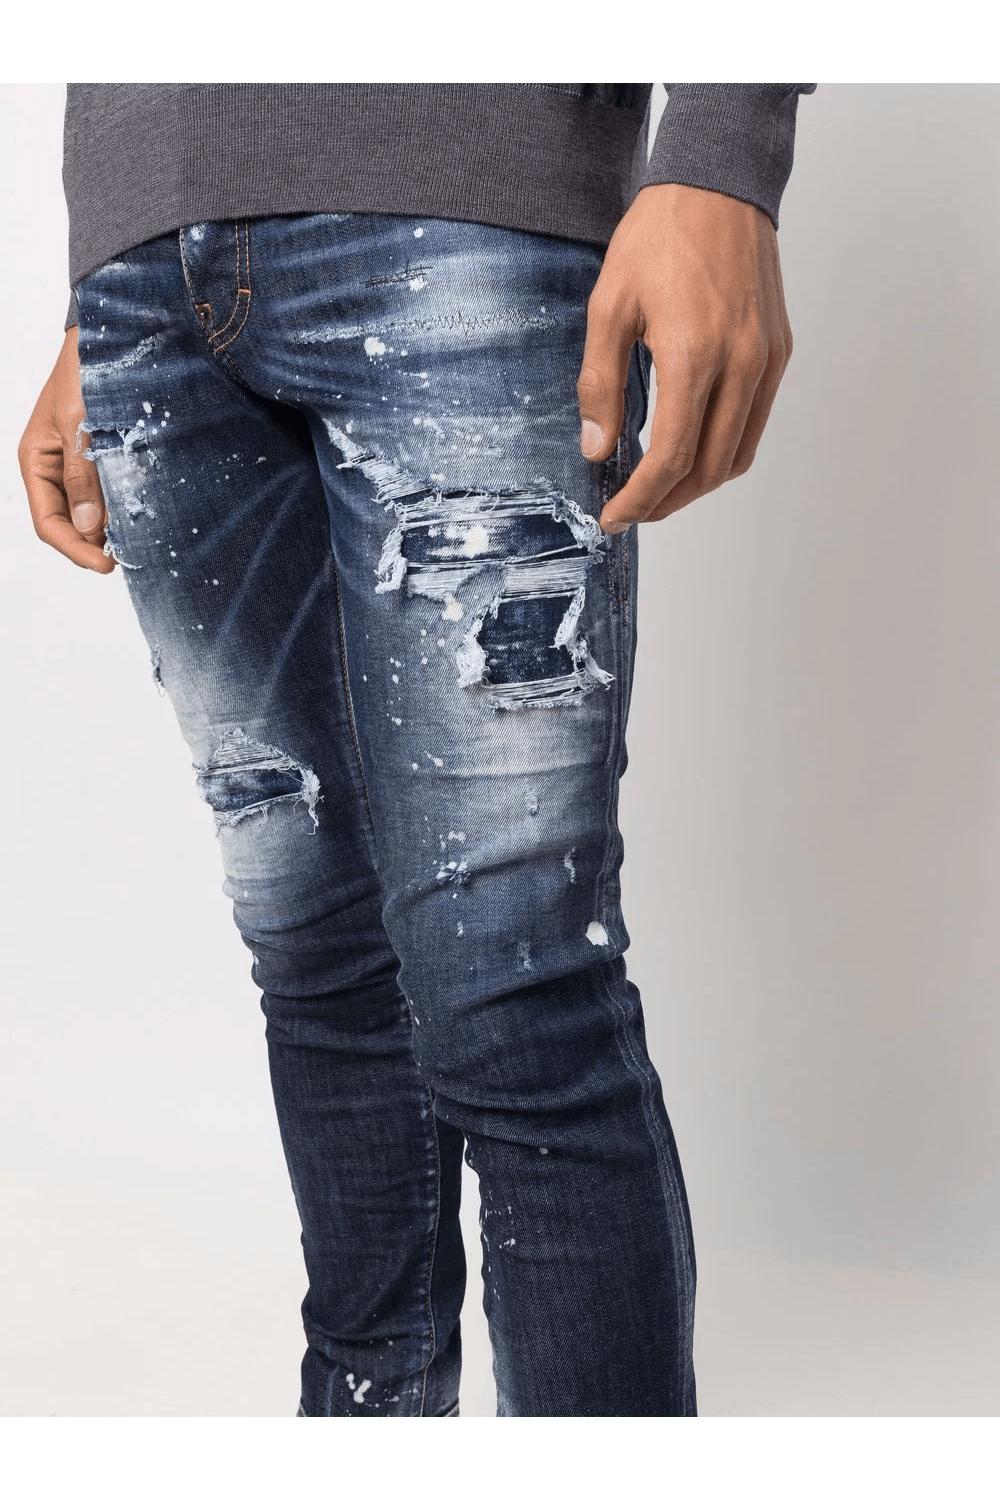 DSquared² Denim Super Twinky Jeans in Blue Navy Save 50% for Men Blue Mens Clothing Jeans Straight-leg jeans 